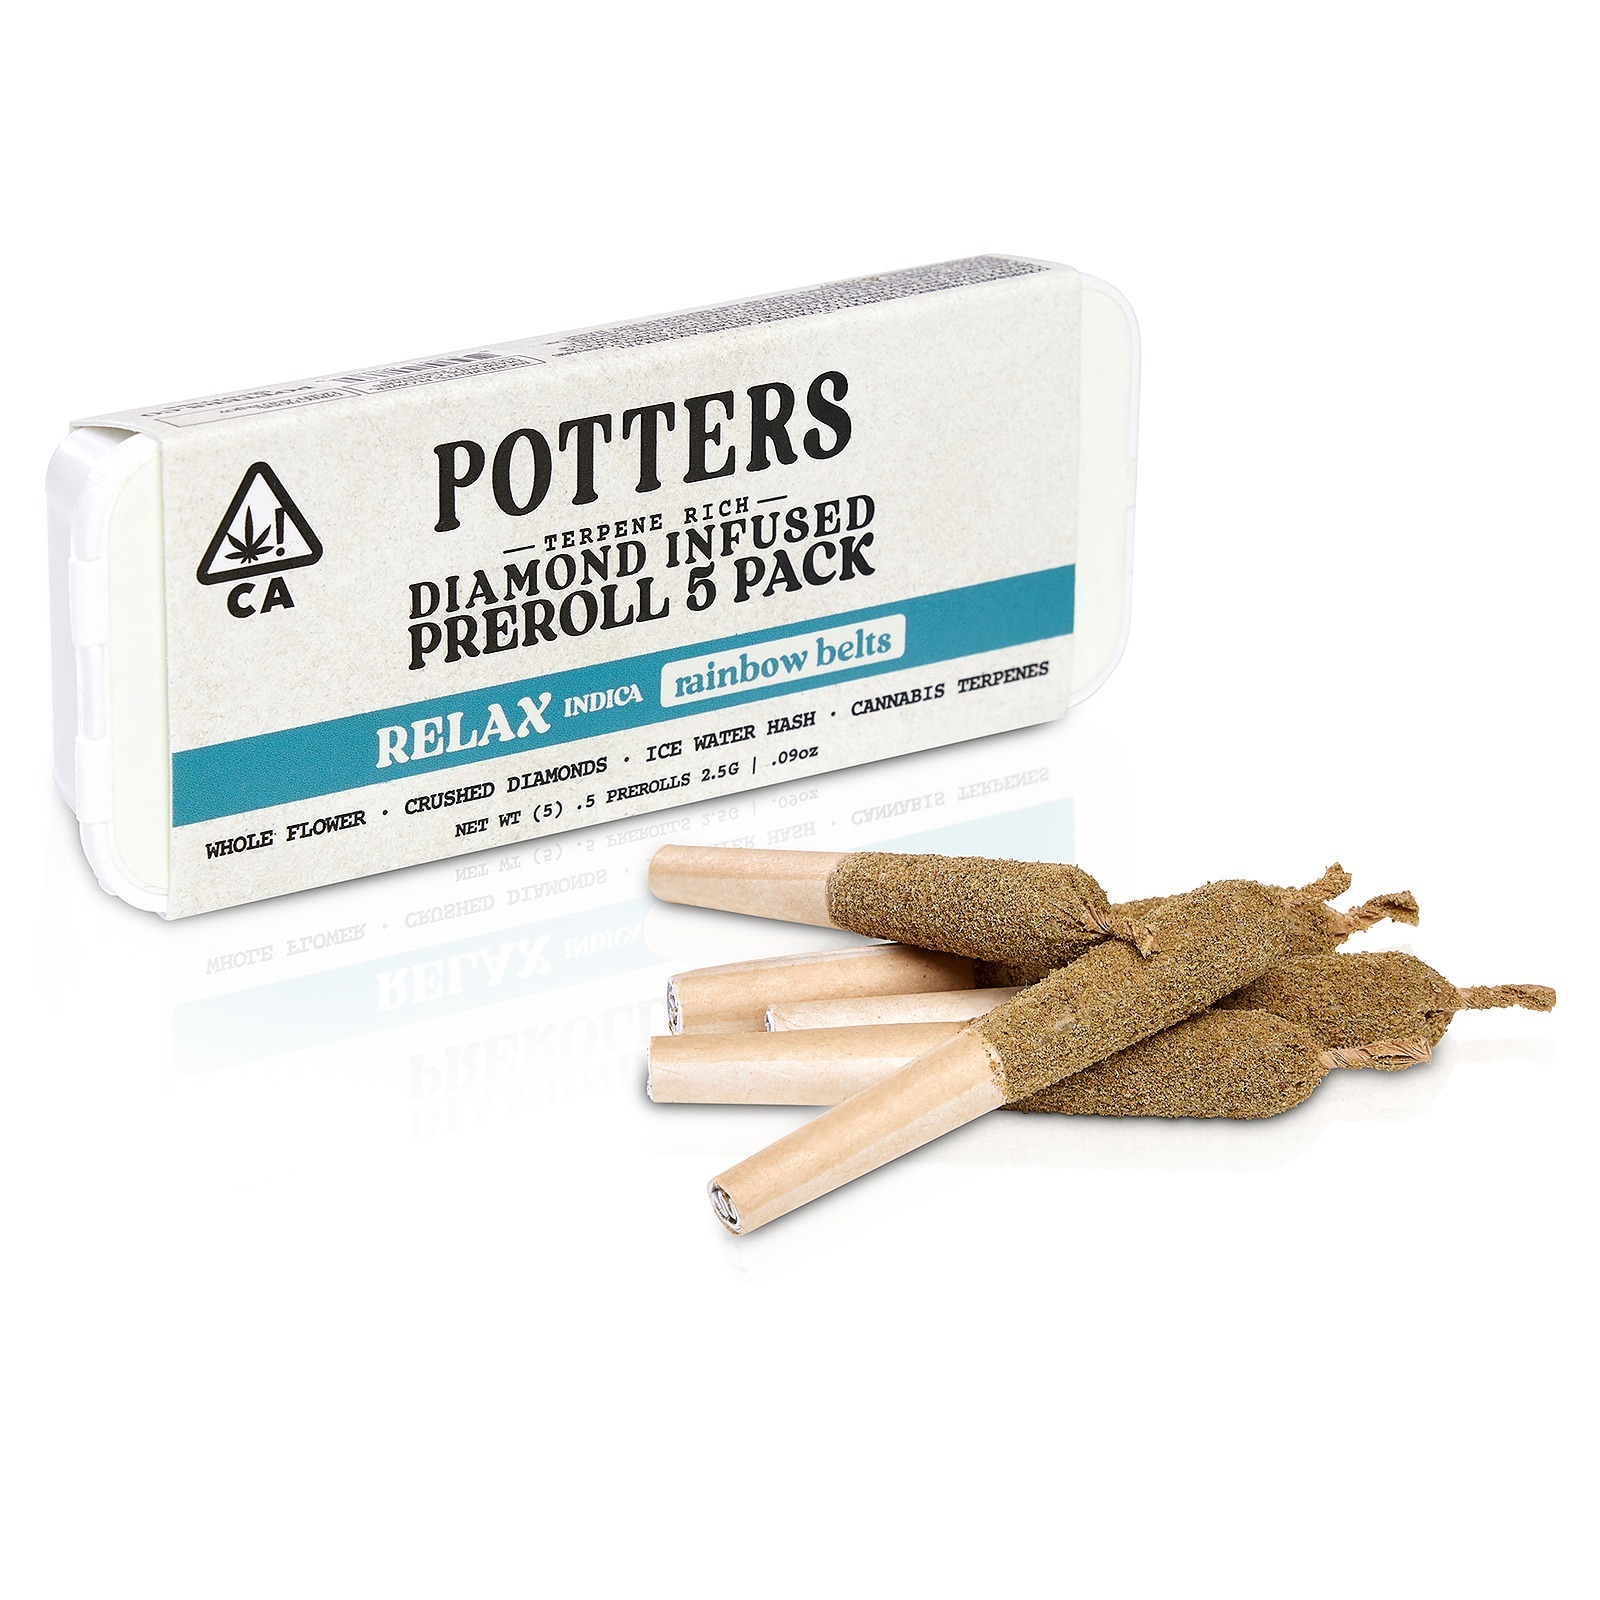 POTTERS: Better High for a Greener Earth.